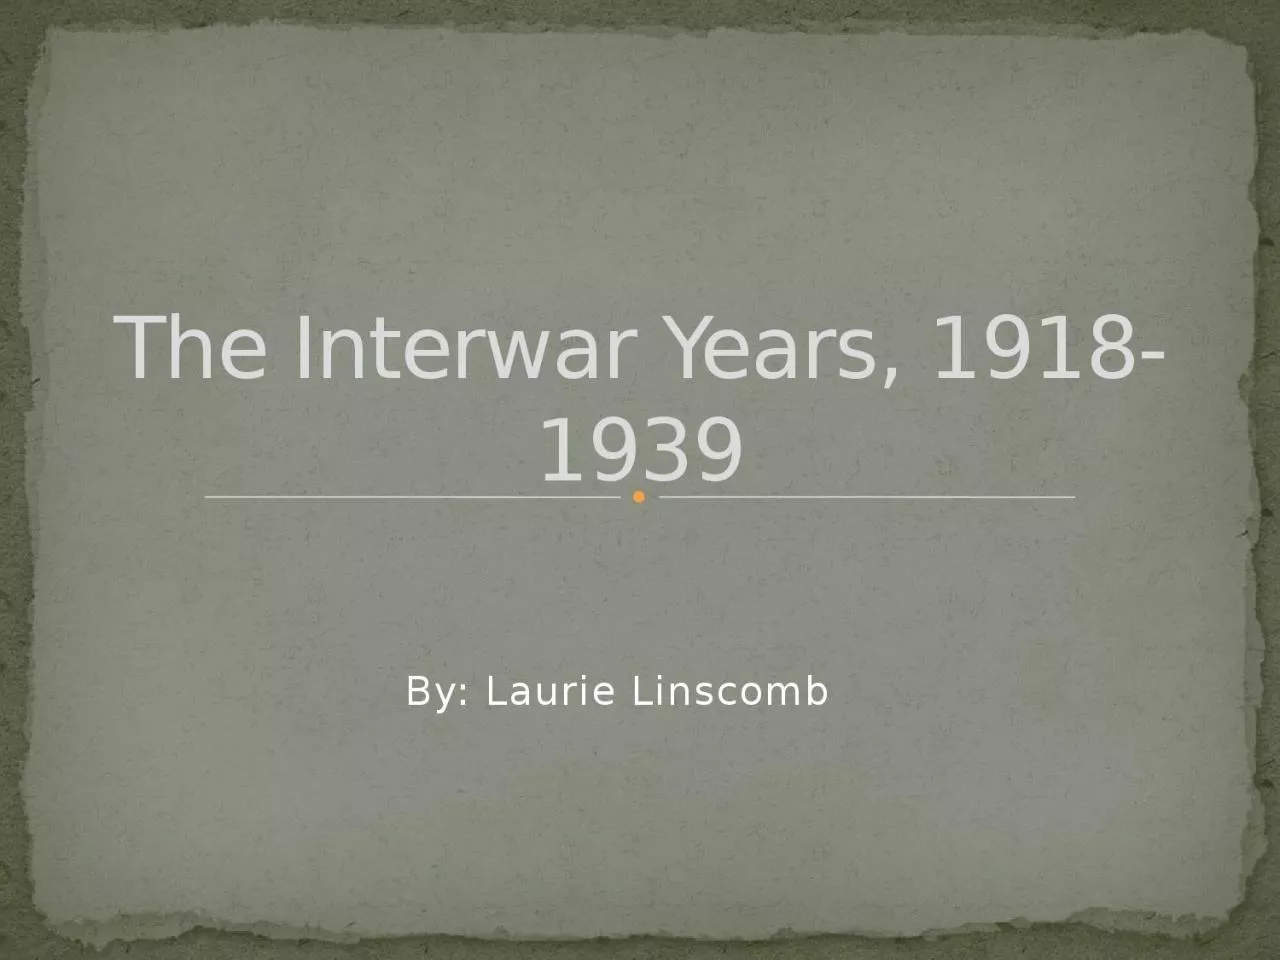 By: Laurie Linscomb The Interwar Years, 1918-1939